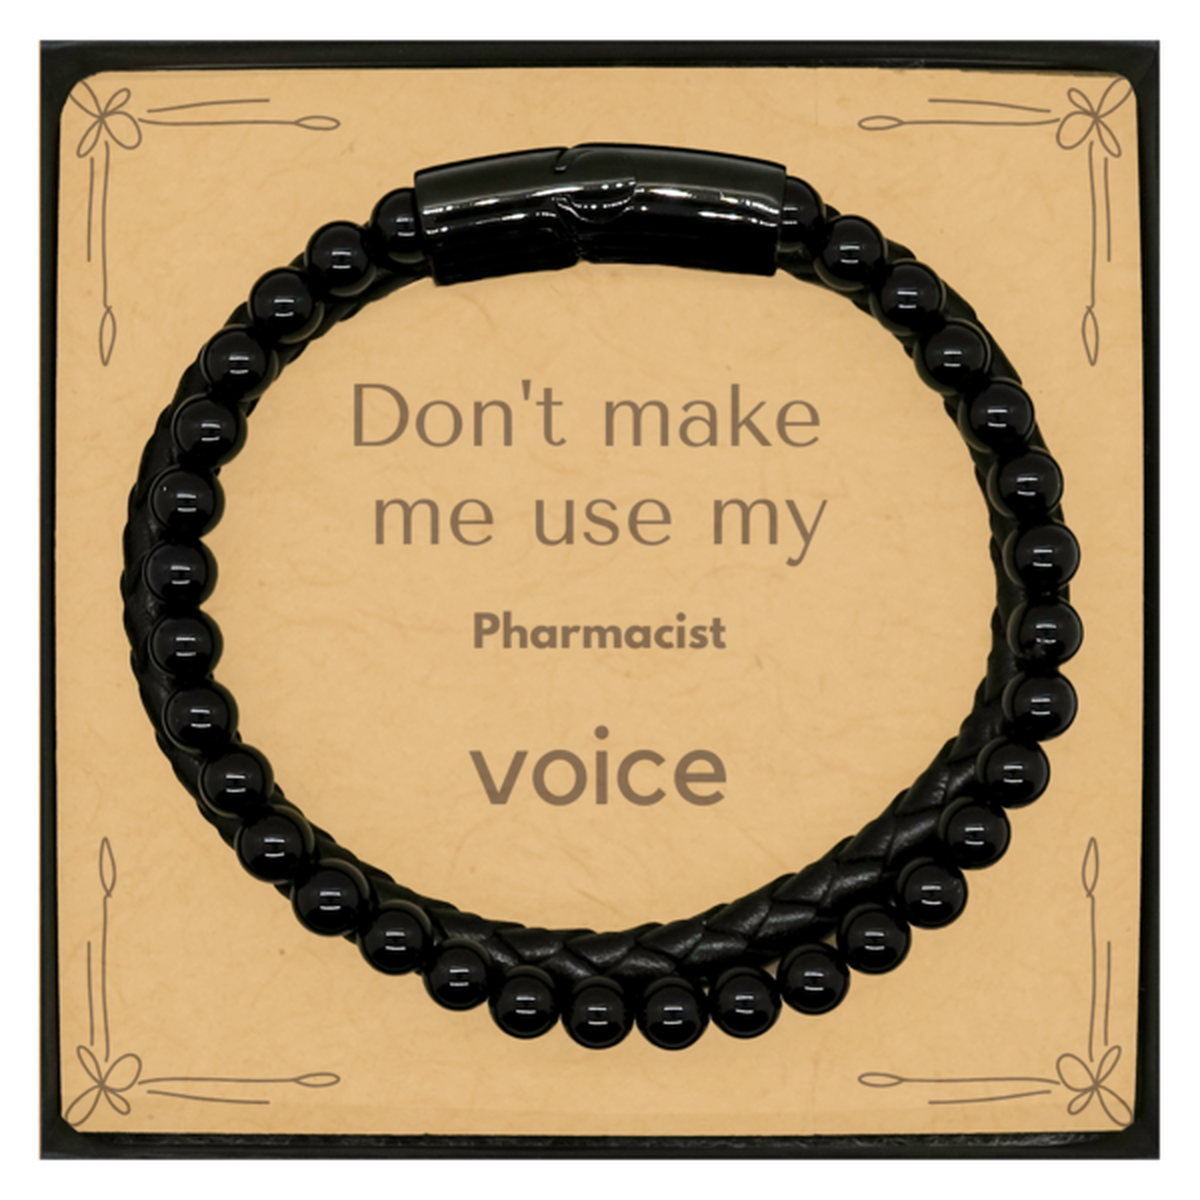 Don't make me use my Pharmacist voice, Sarcasm Pharmacist Card Gifts, Christmas Pharmacist Stone Leather Bracelets Birthday Unique Gifts For Pharmacist Coworkers, Men, Women, Colleague, Friends